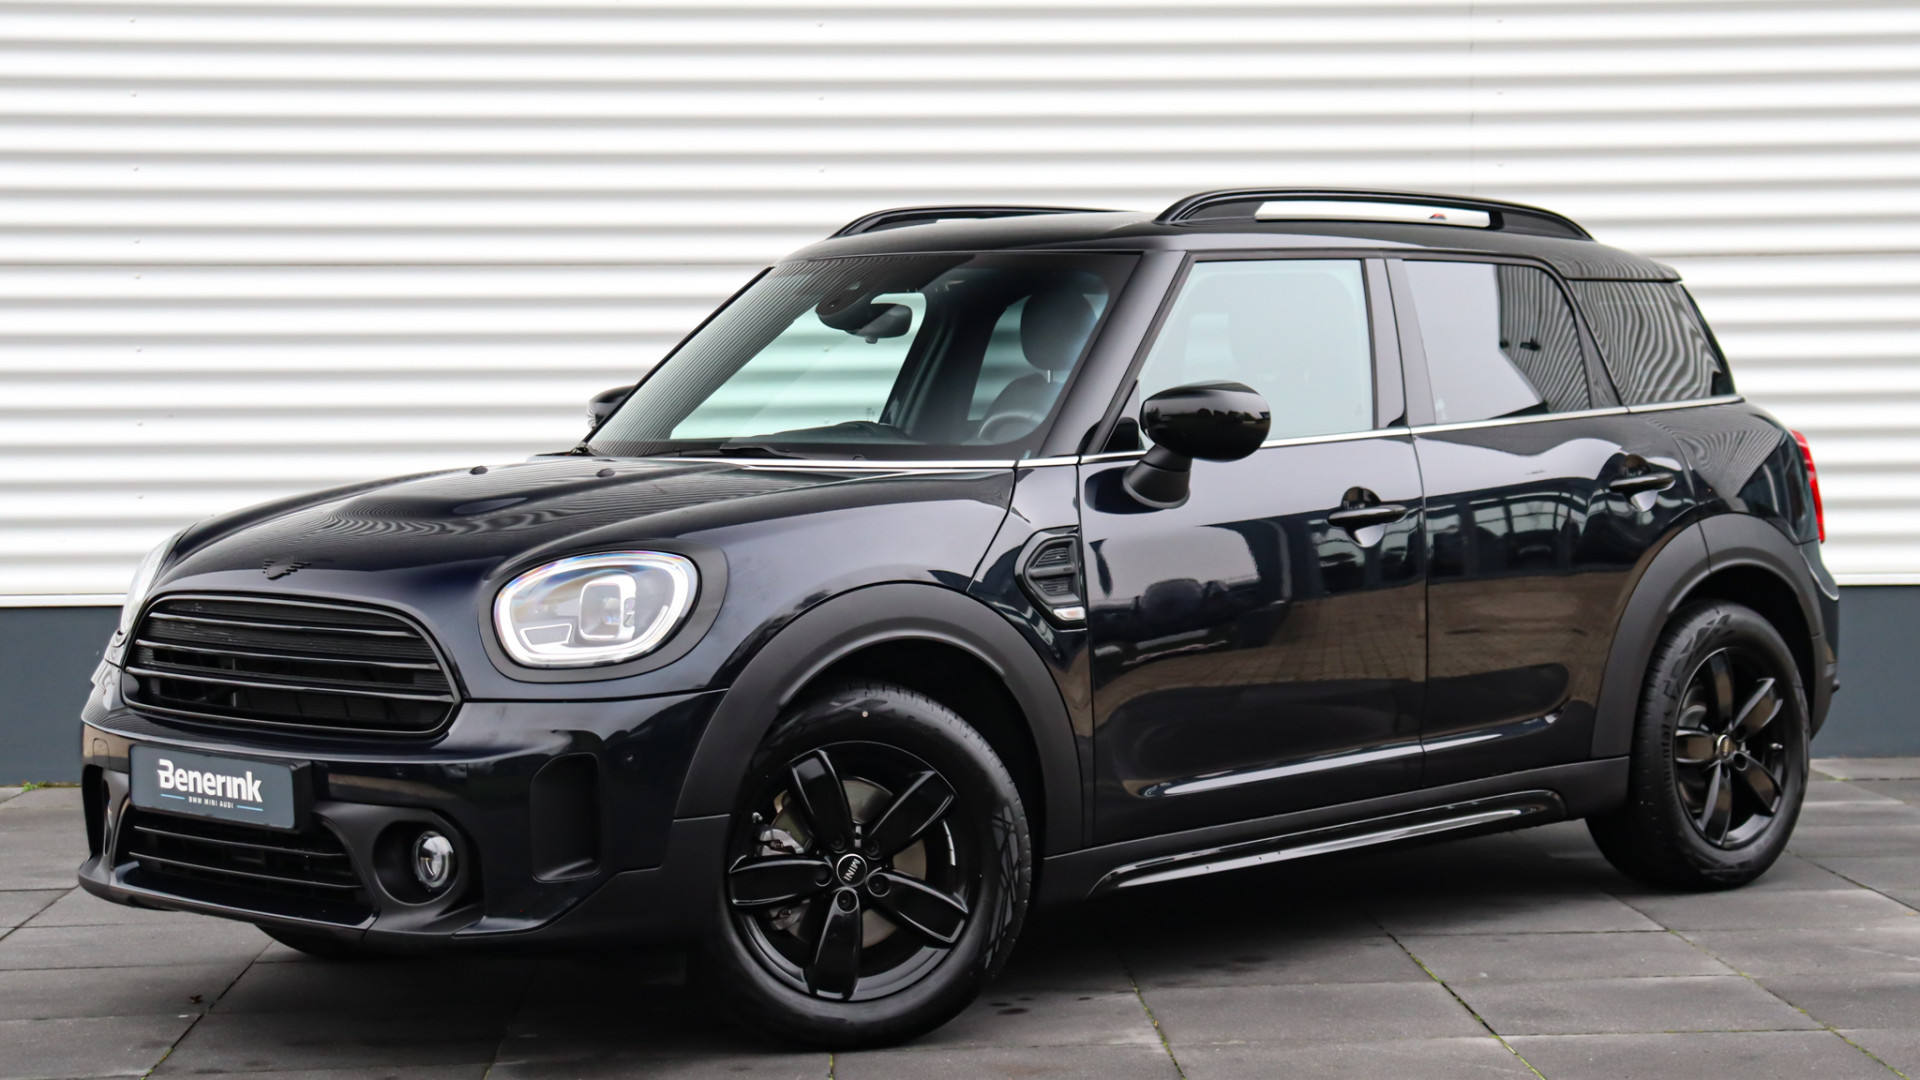 Benerink - Countryman 1.5 Cooper Business Edition